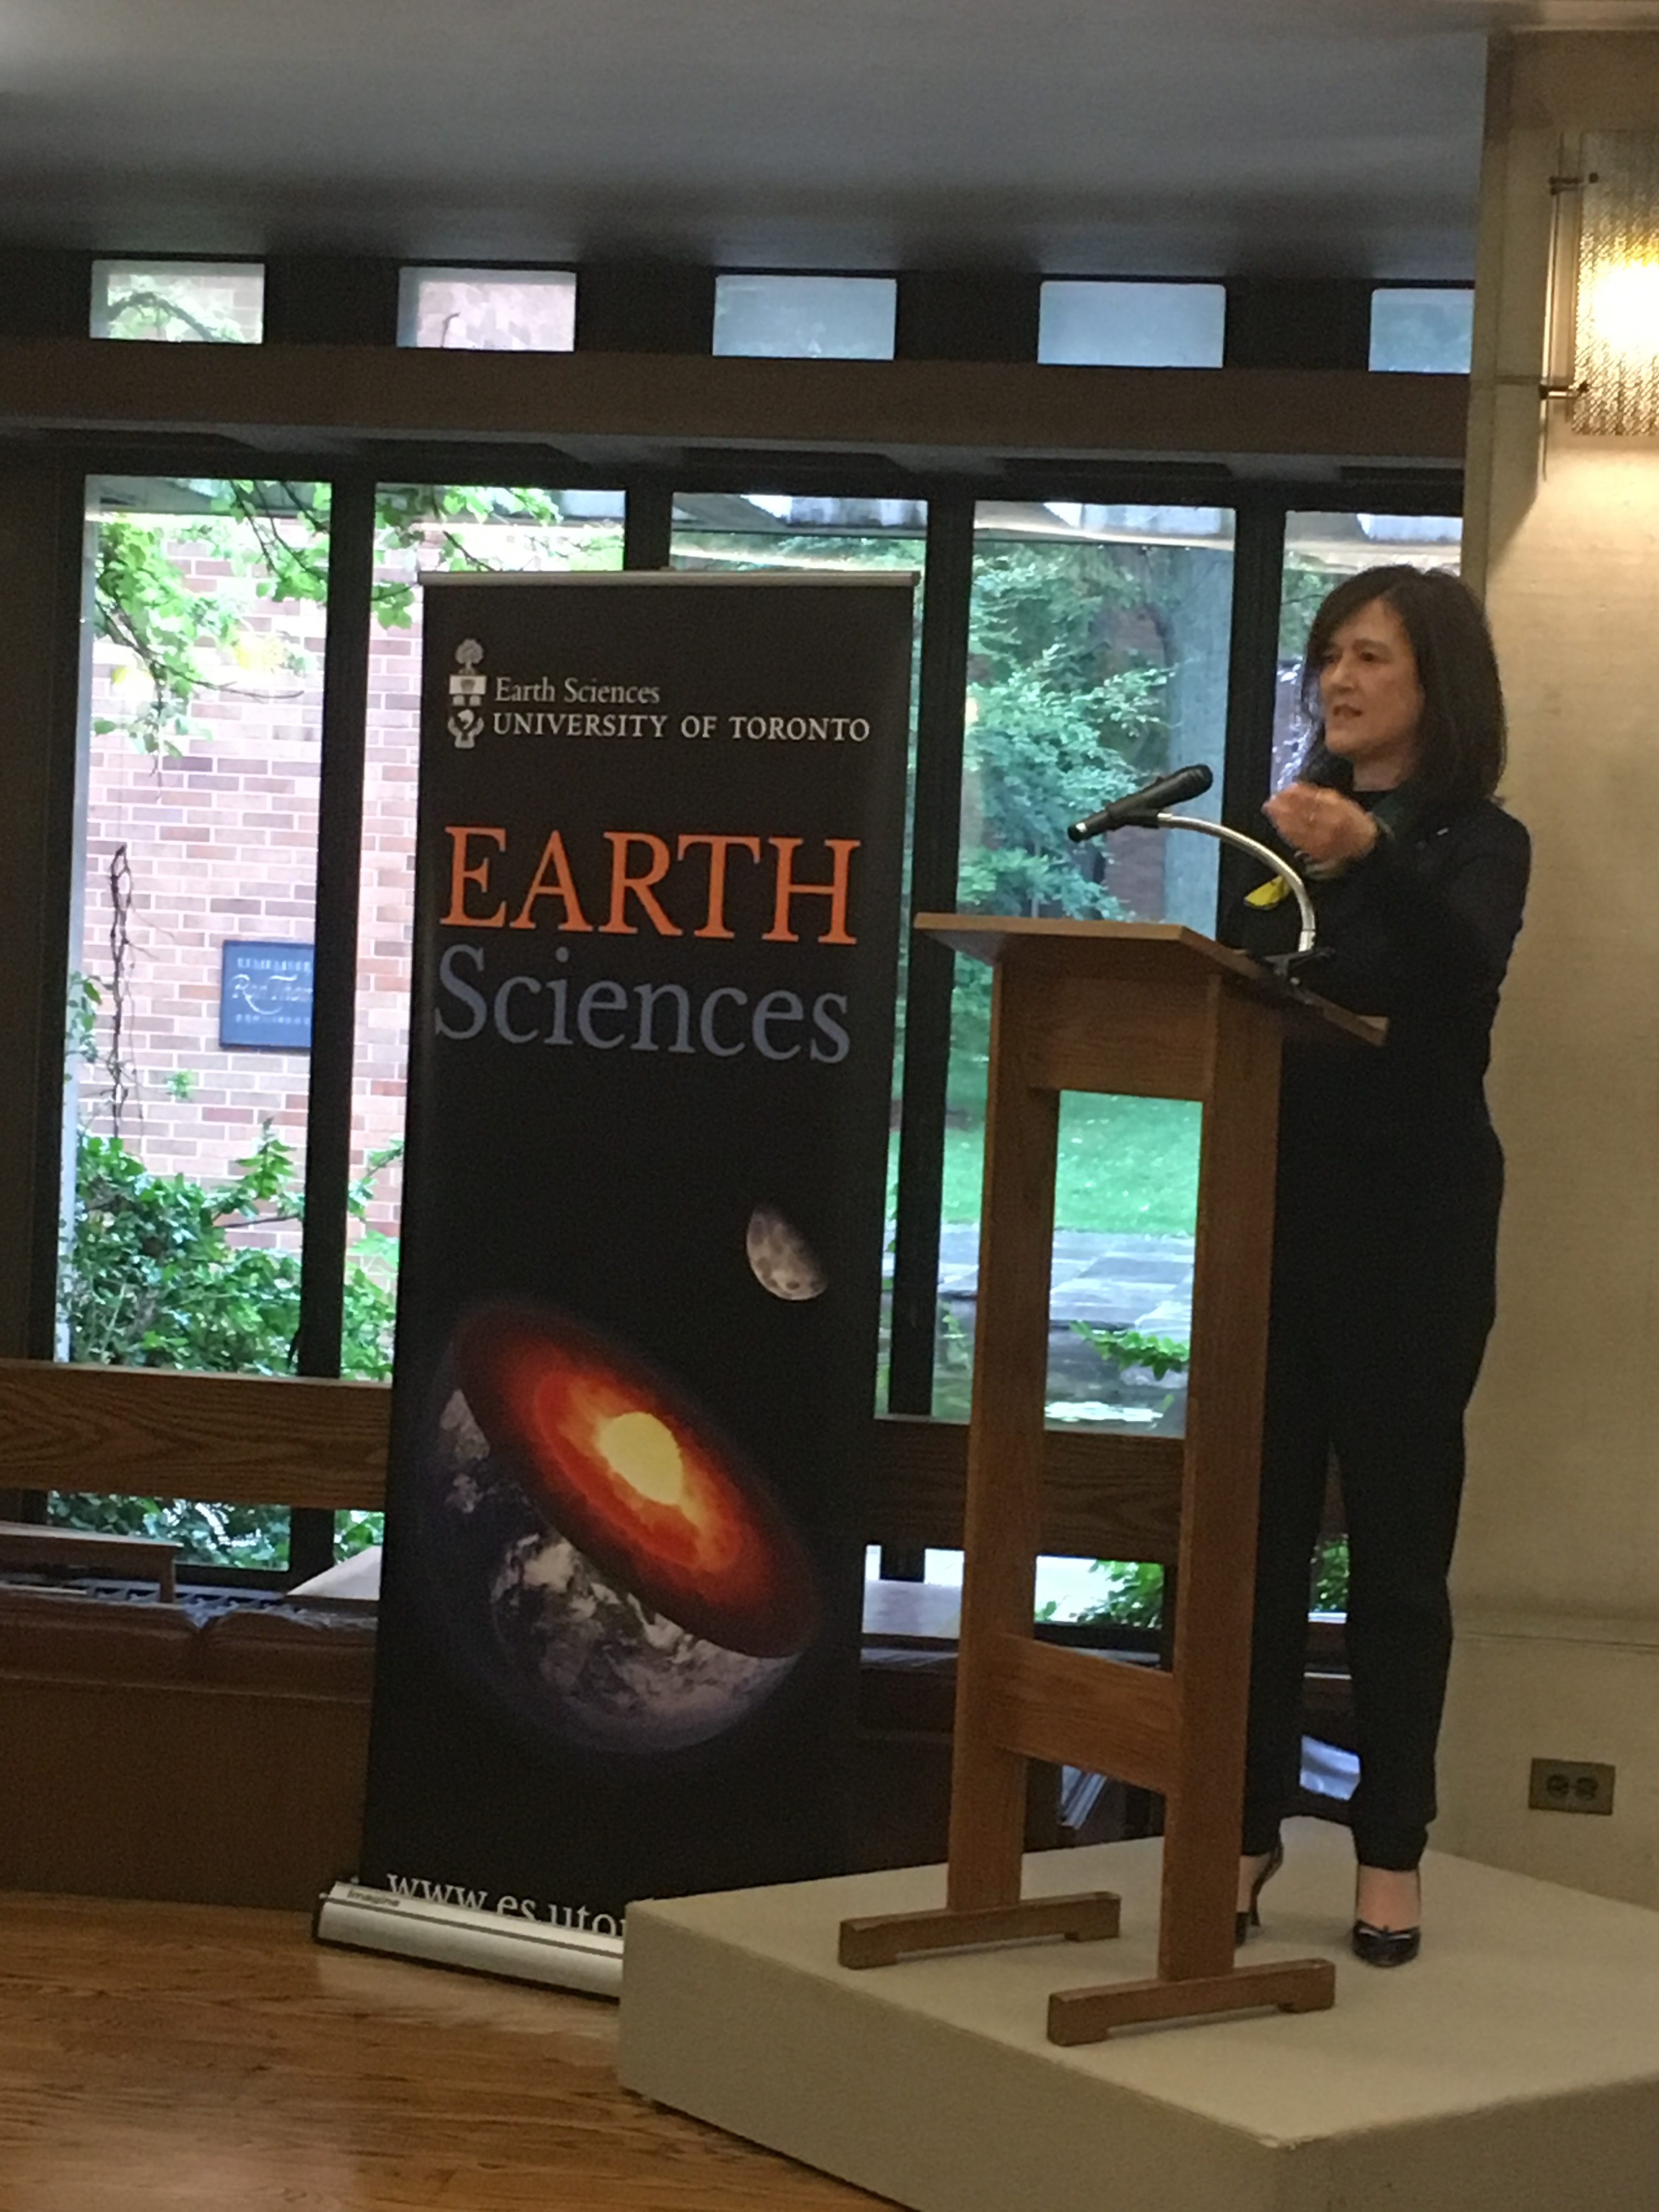 Dr. Barbara Sherwood Lollar received the 2019 Gerhard Herzberg Canada Gold Medal for Science and Engineering. University of Toronto recently hosted a special reception to honour her achievement.